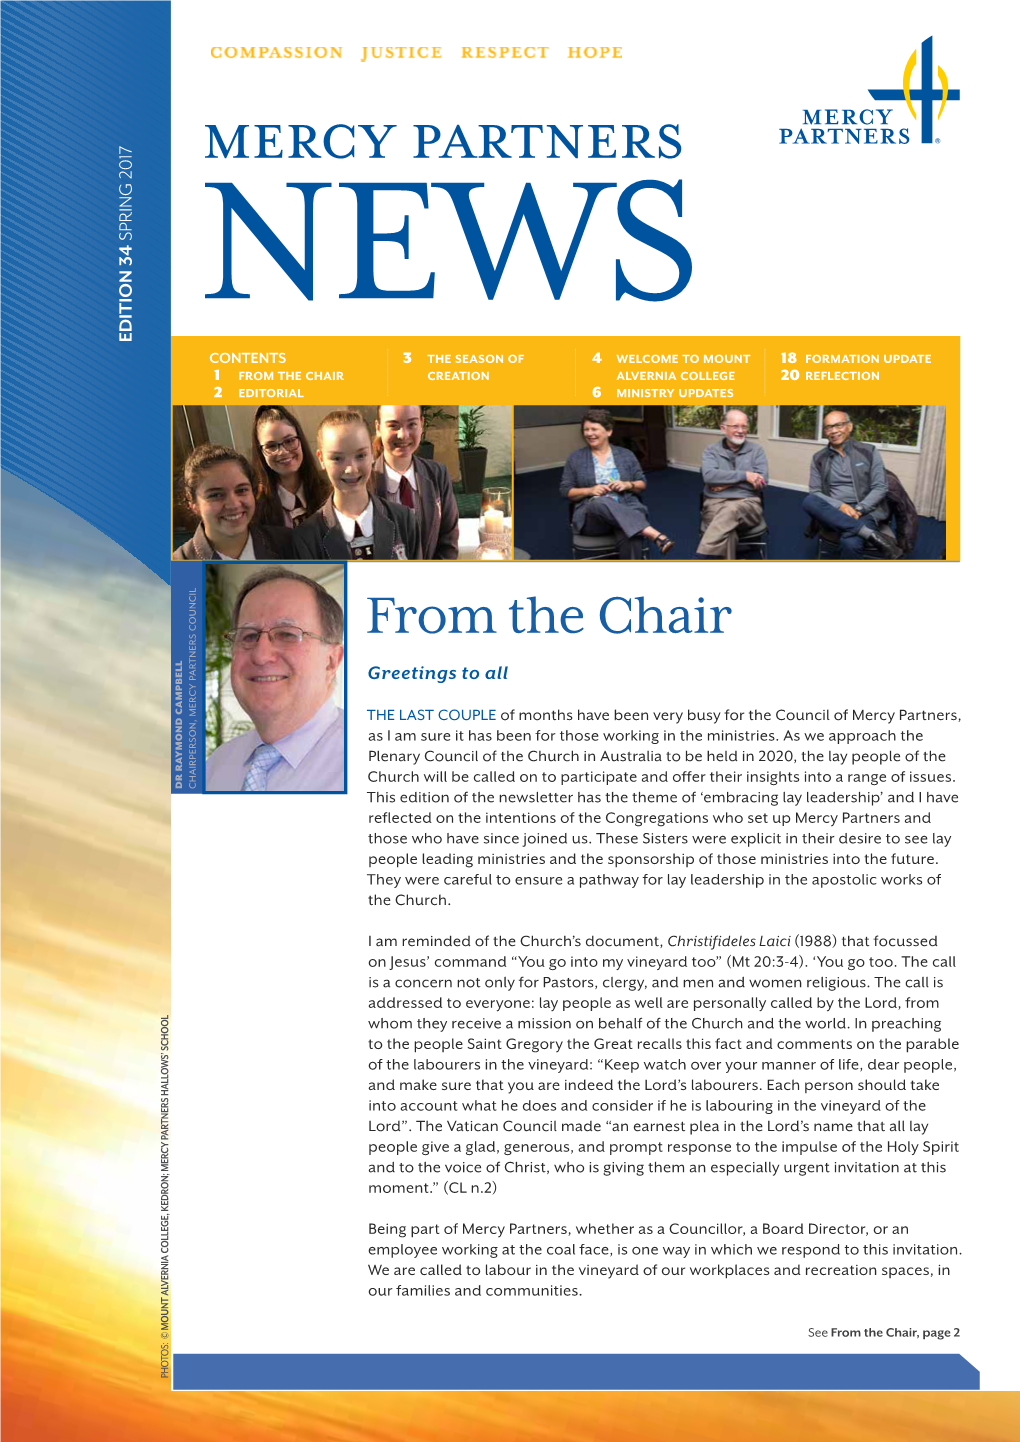 From the Chair Creation Alvernia College 20 Reflection 2 Editorial 6 Ministry Updates